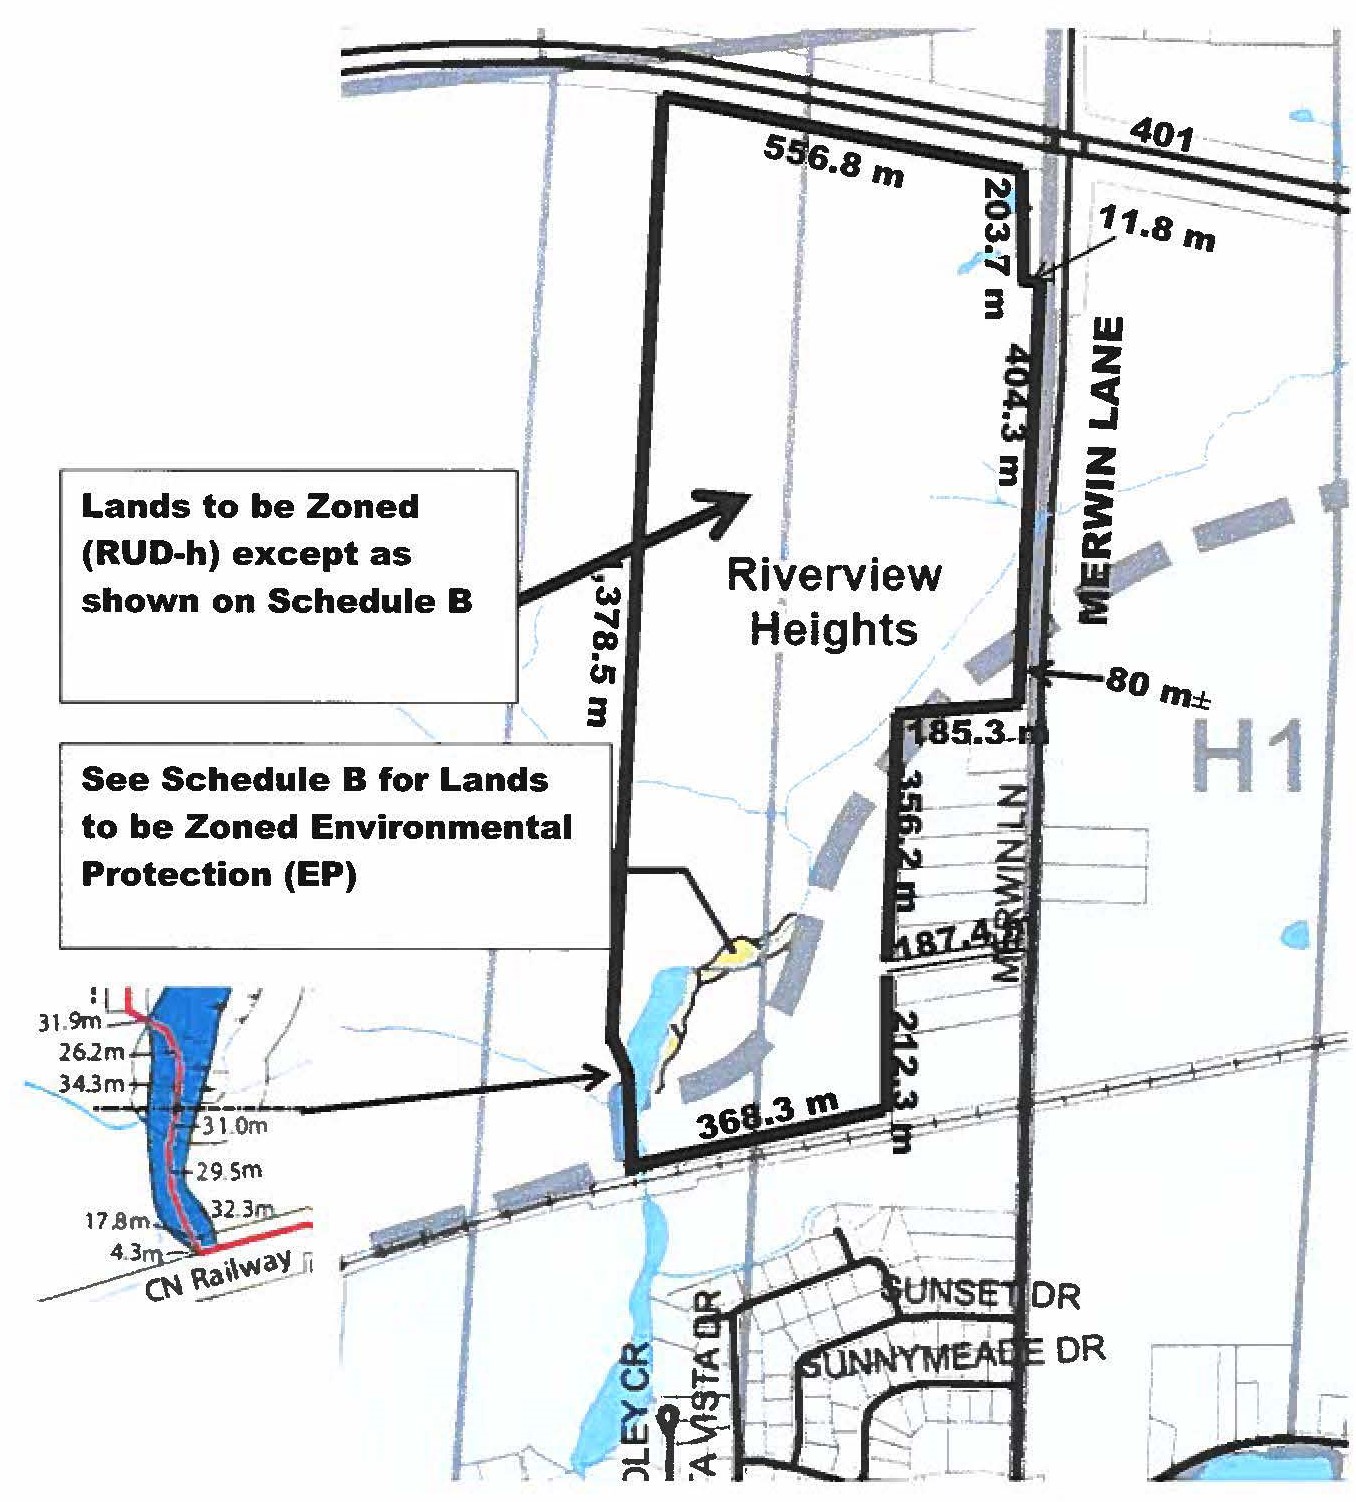 map showing lands to be zoning RUD-h except as shown on Schedule B (lands to be zoned environmental protection (EP)